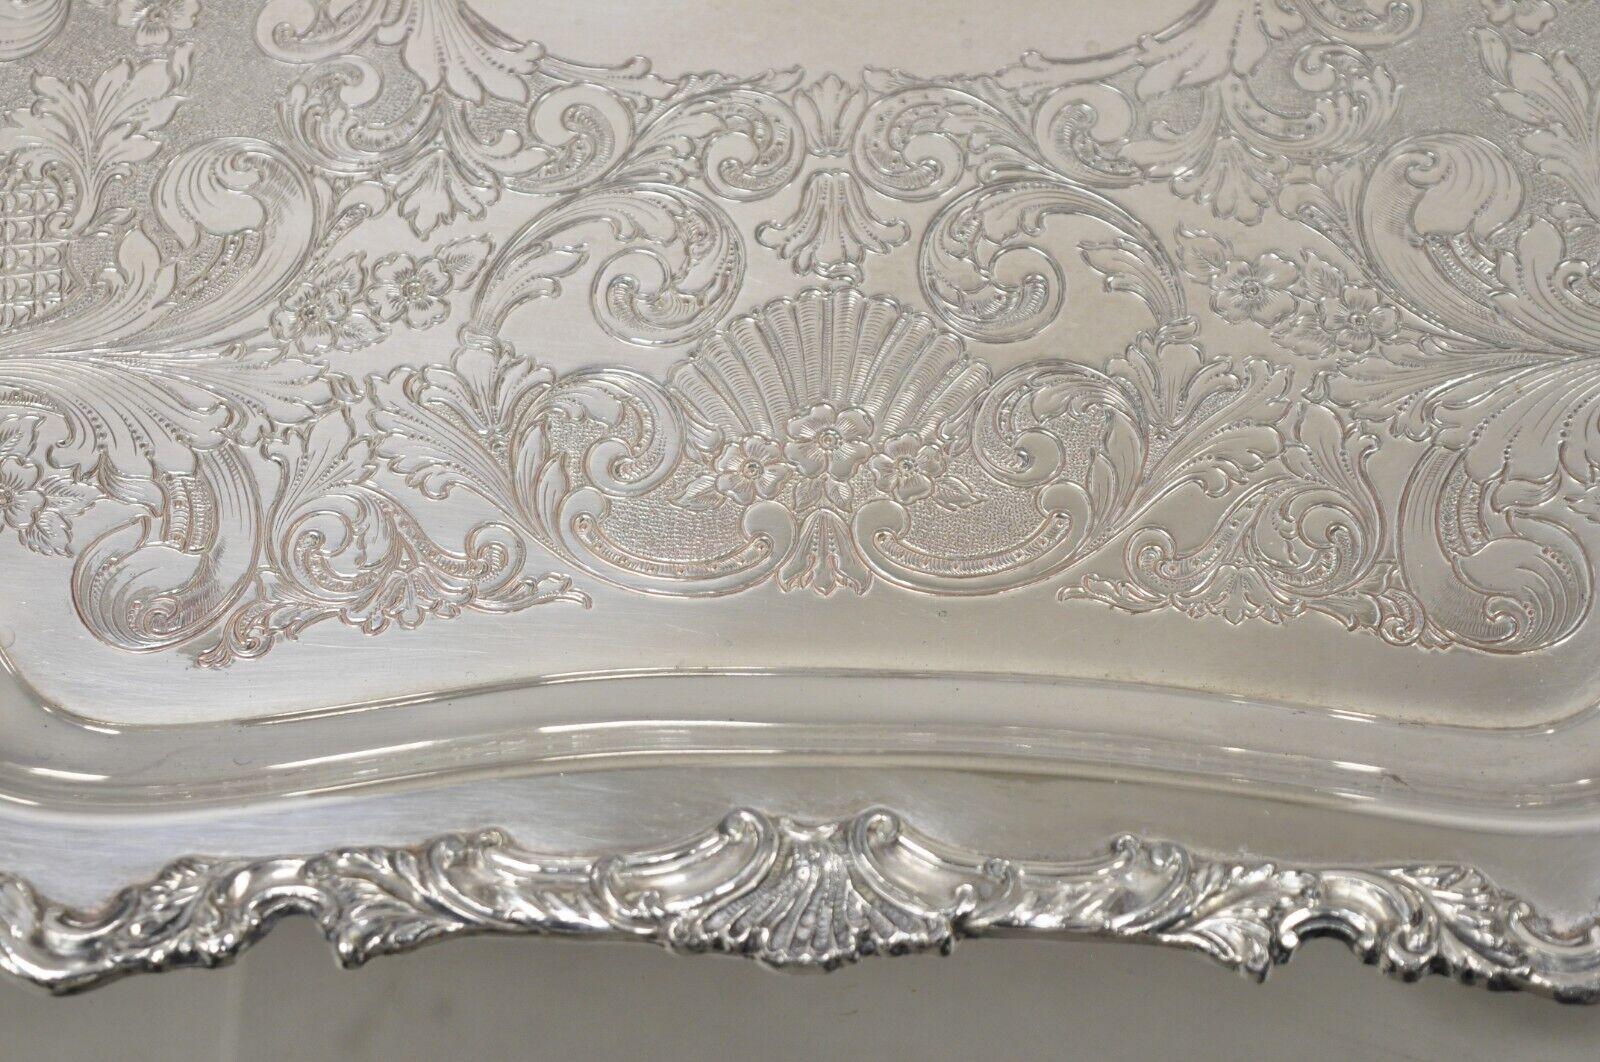 Community Ascot 0316-10 Silver Plated Ornate Twin Handle Serving Platter Tray In Good Condition For Sale In Philadelphia, PA